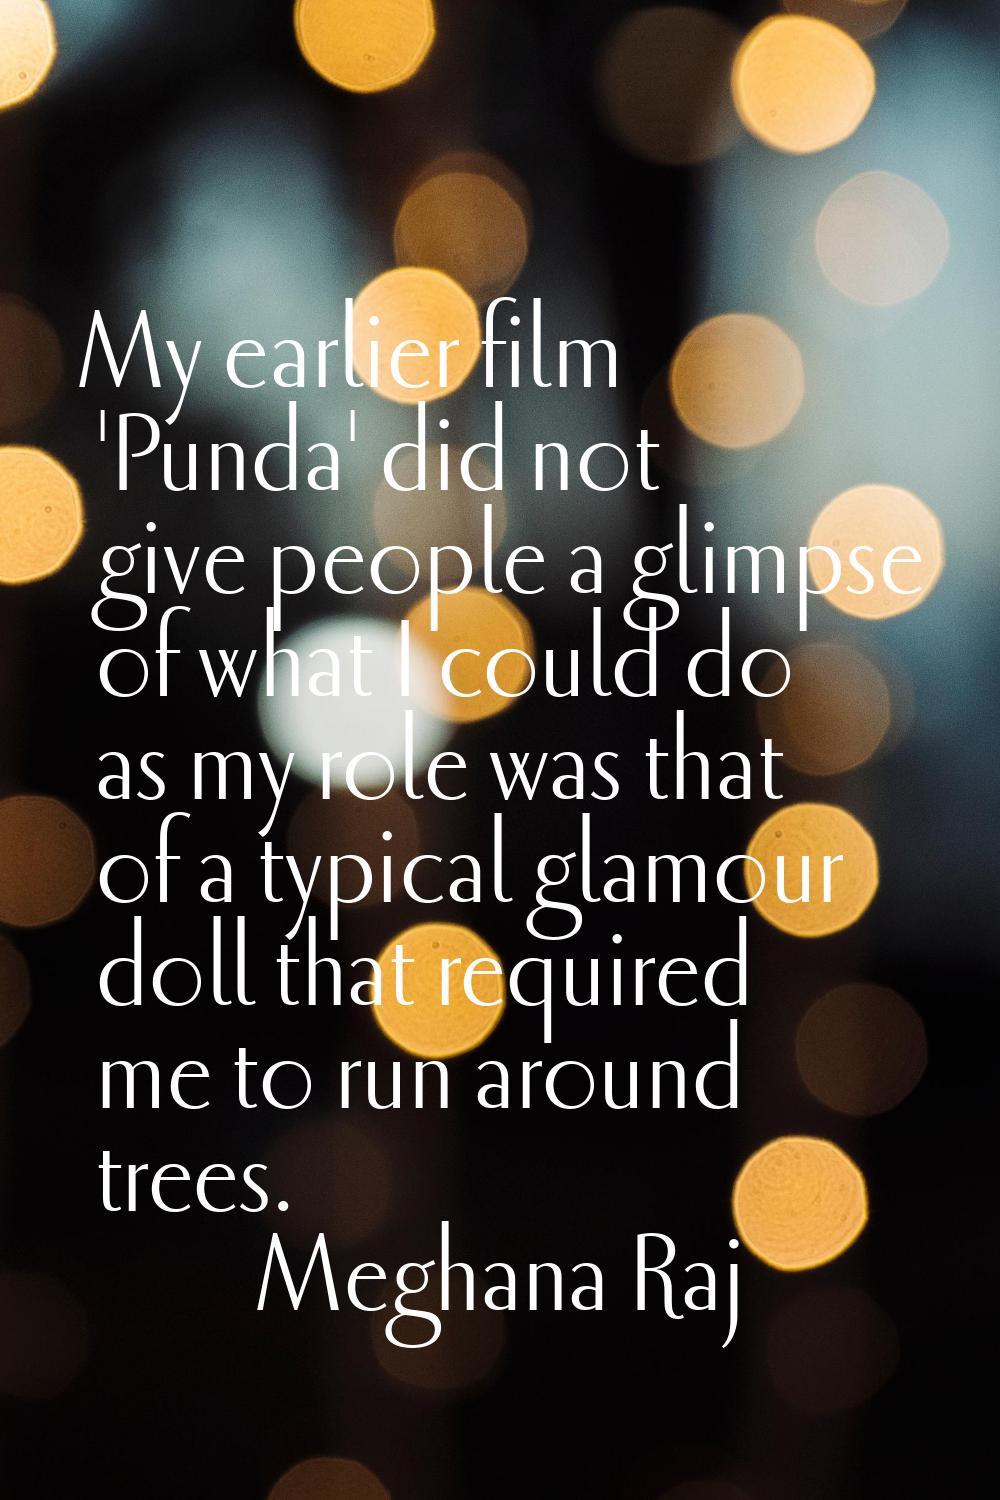 My earlier film 'Punda' did not give people a glimpse of what I could do as my role was that of a t